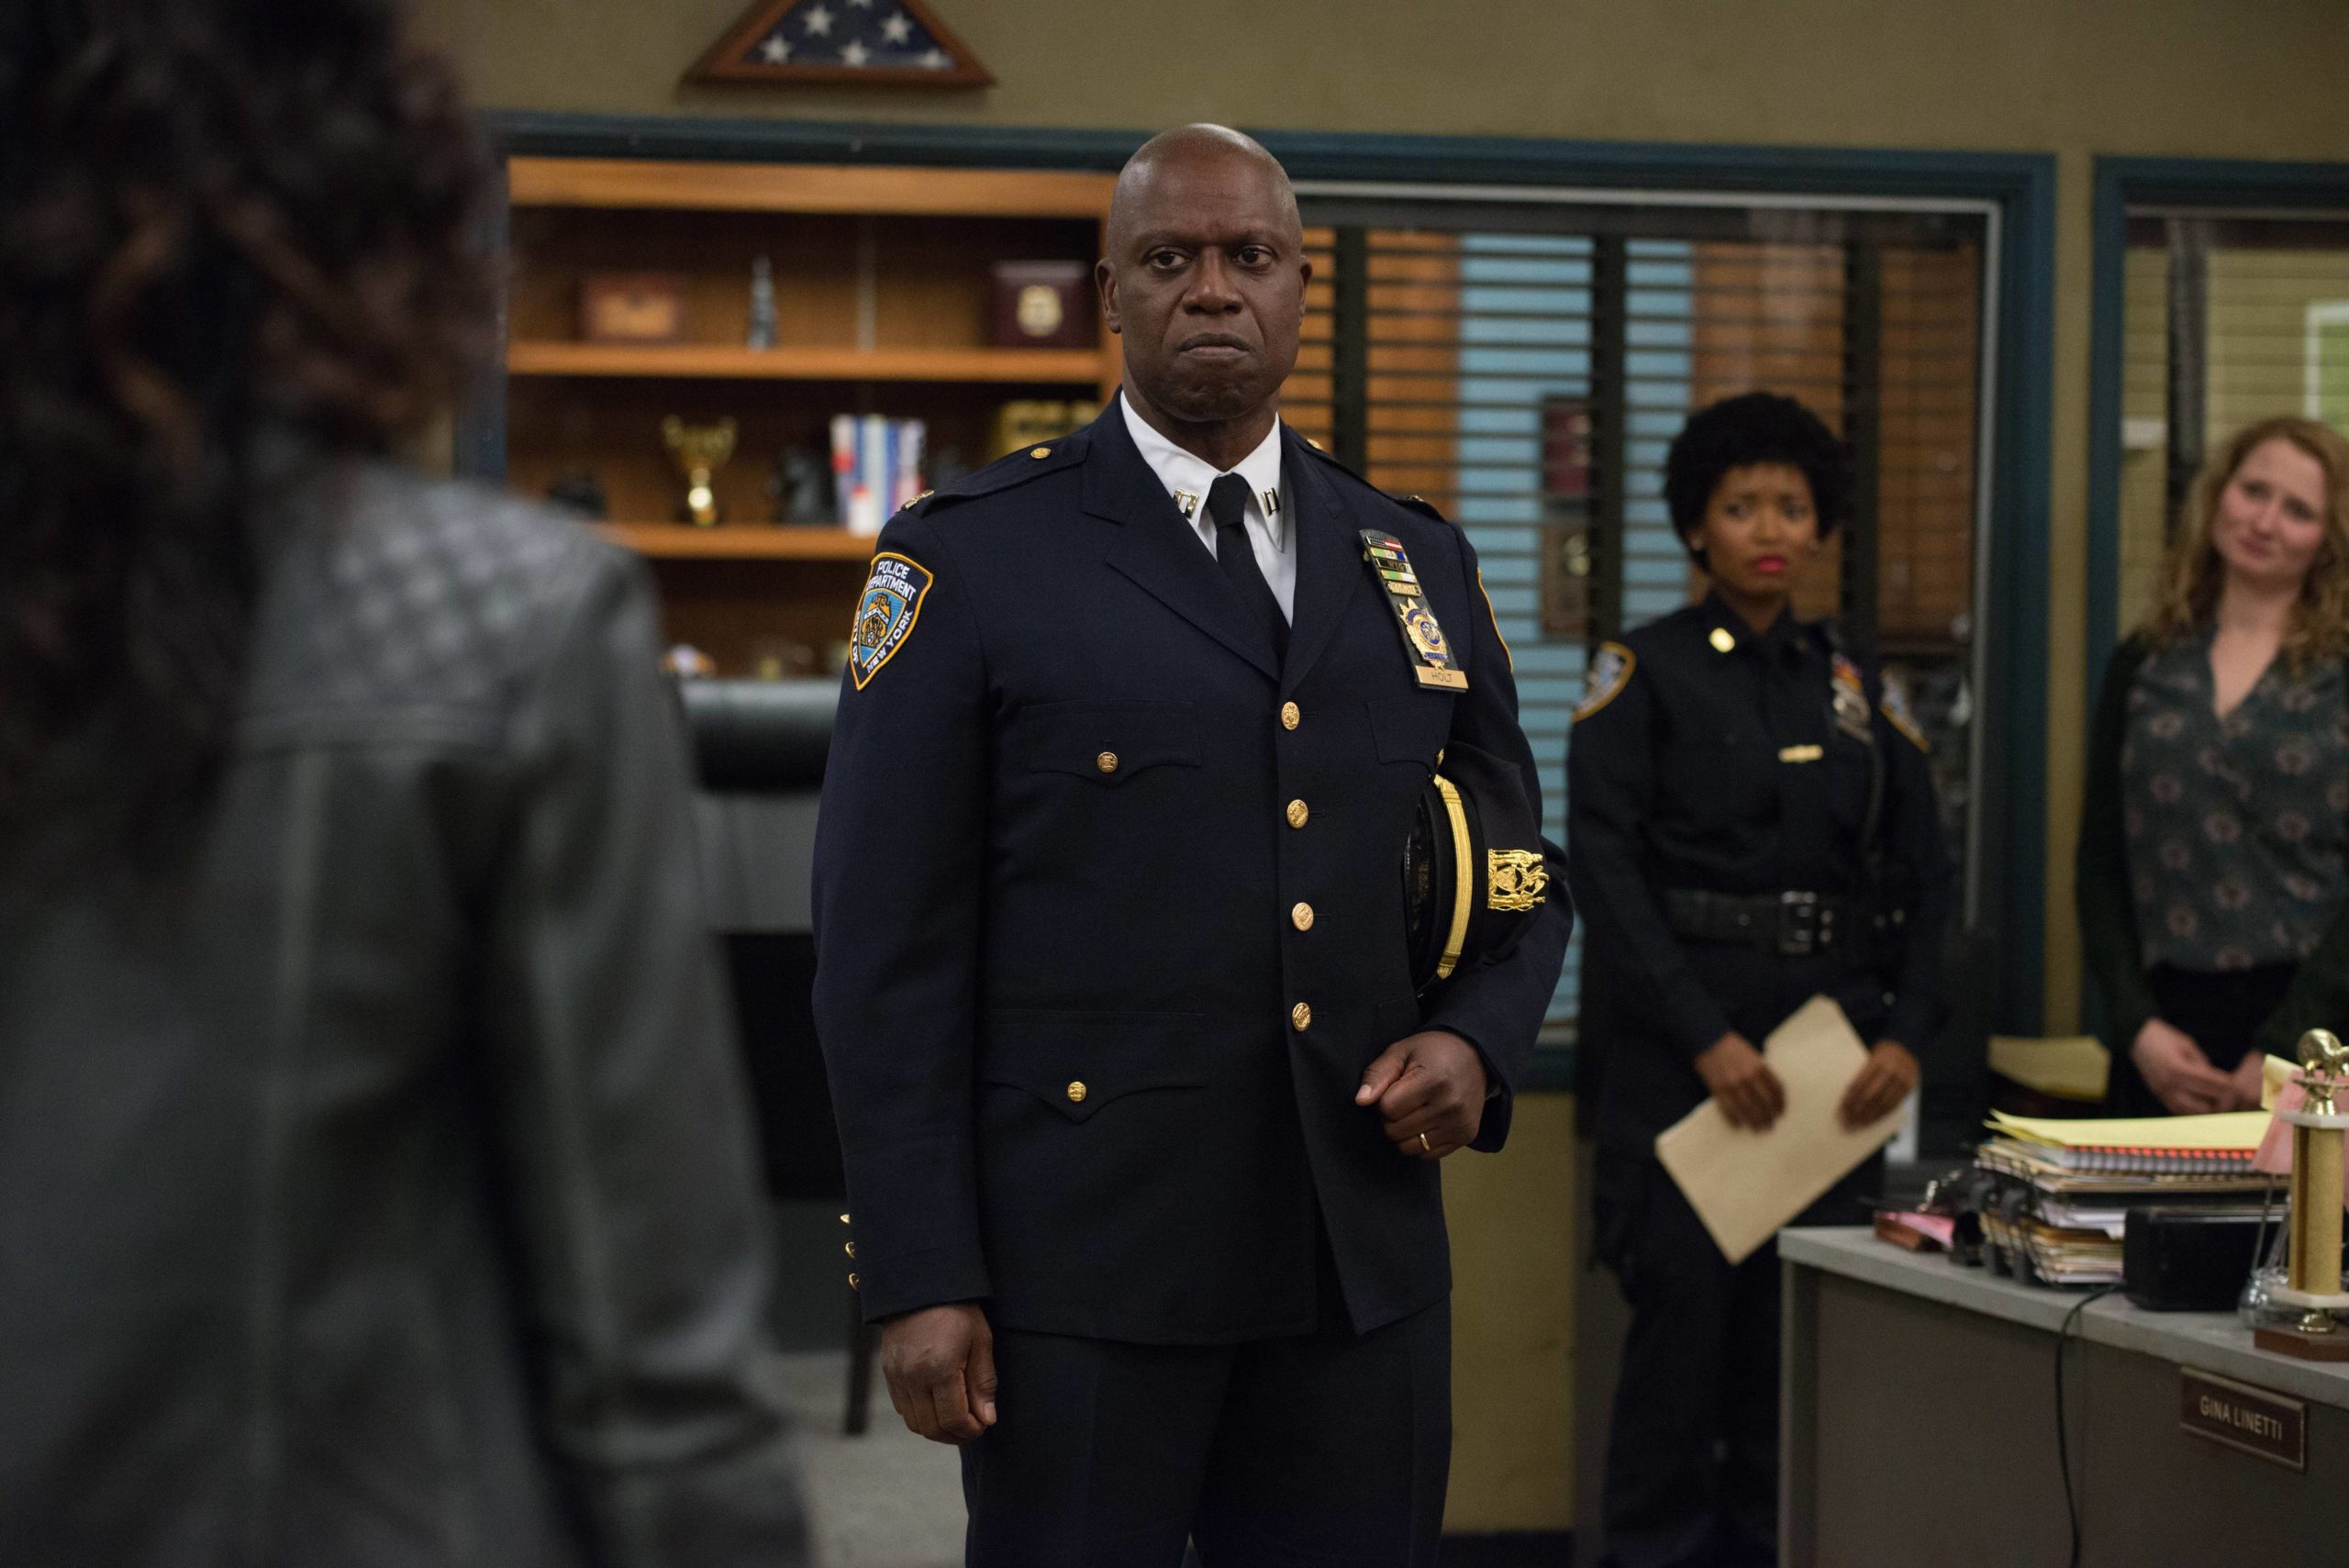 Capt. Holt (Andre Braugher) in the 'Johnny and Dora' season finale episode of Brooklyn Nine-Nine